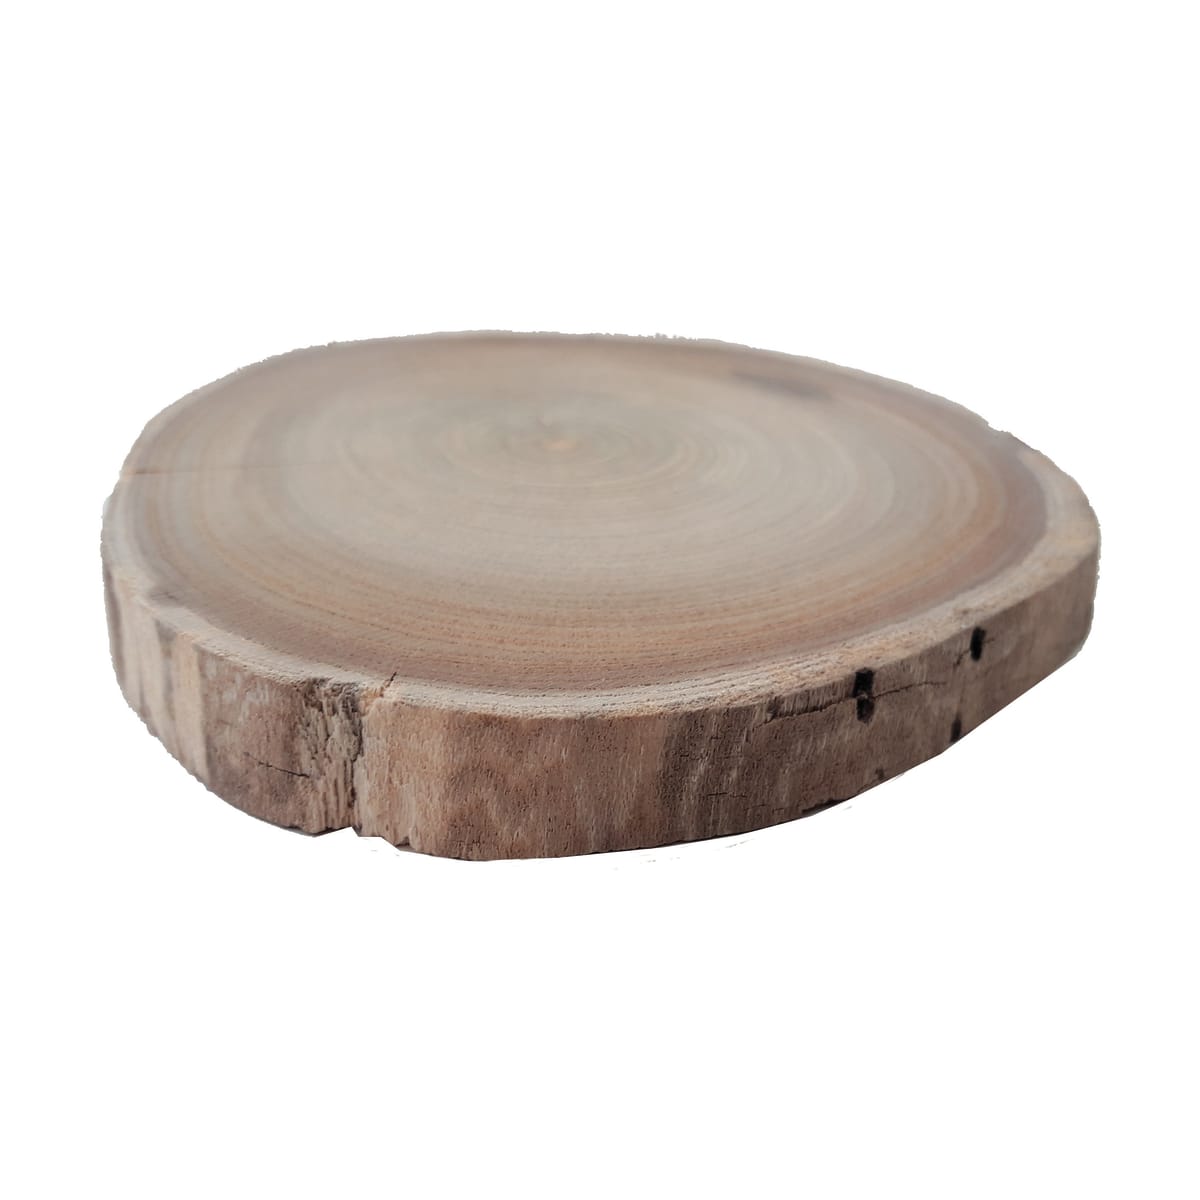 10 WOODEN WASHERS DIAMETER 5/6 CM THICKNESS 10 MM